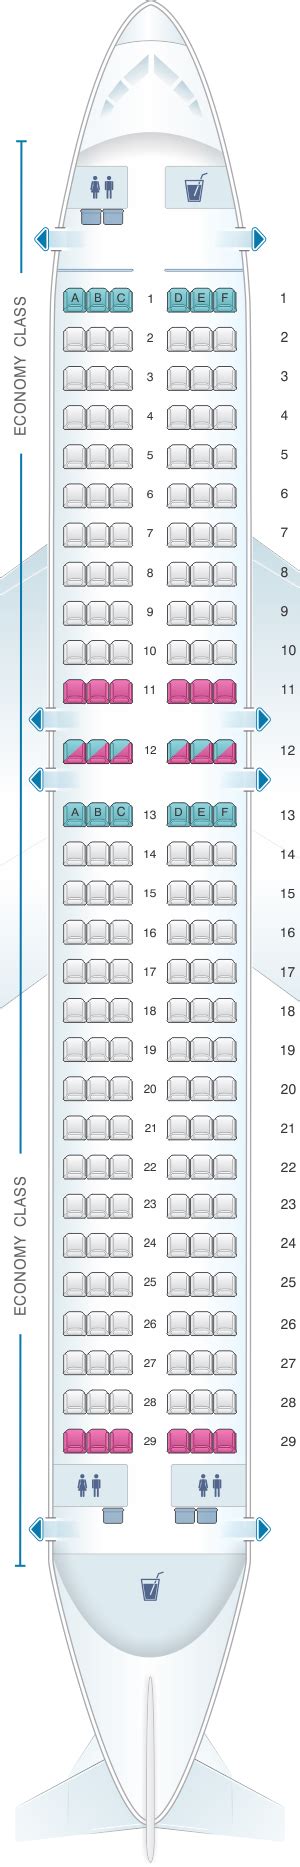 Seat Map Airberlin Airbus A320 200